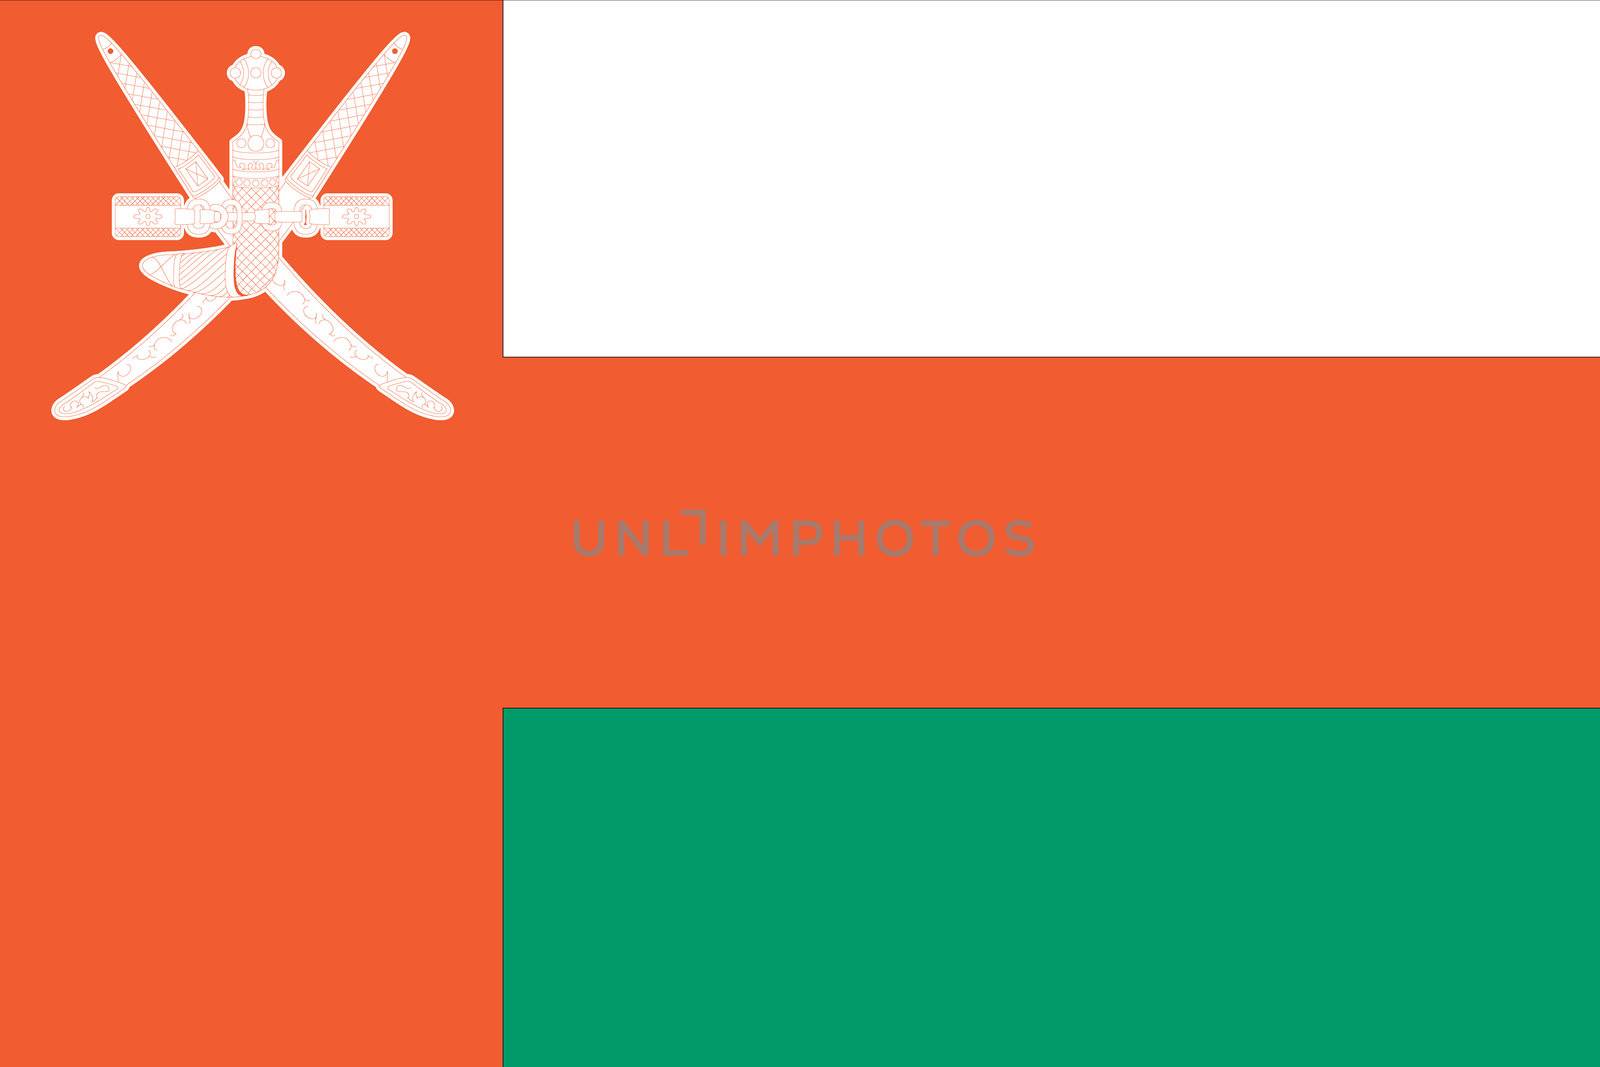 Illustrated Drawing of the flag of Oman by DragonEyeMedia